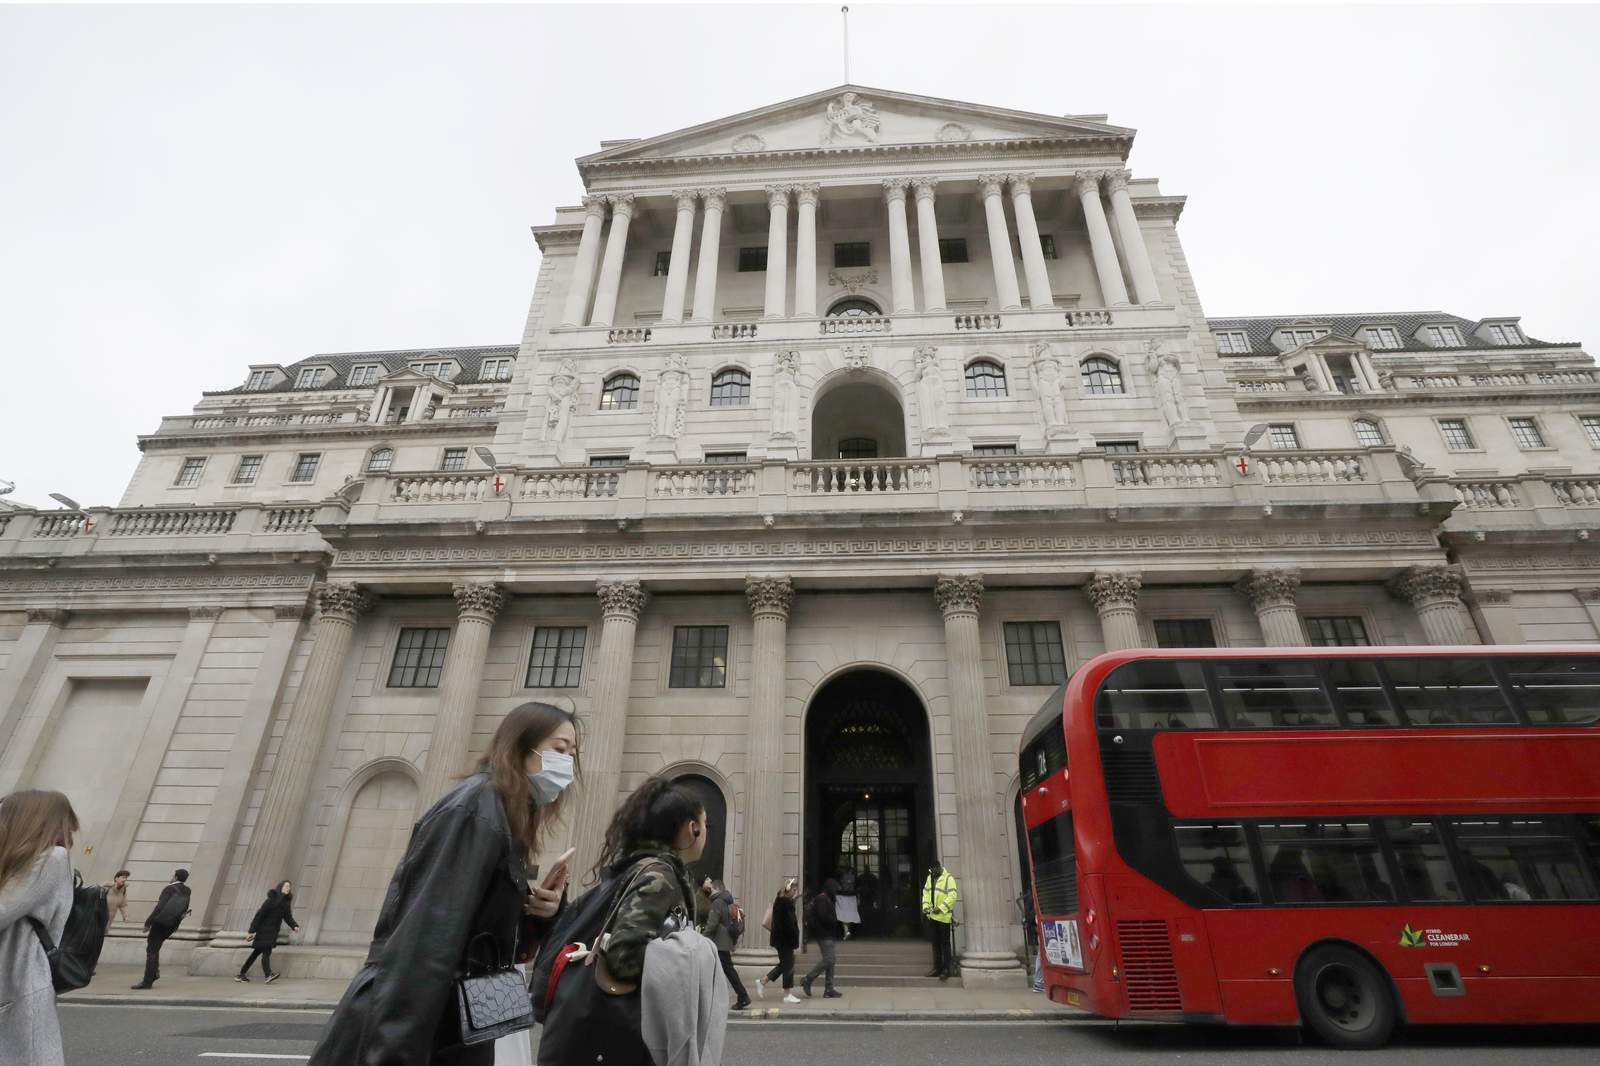 Bank of England says sorry for slave links as UK faces past